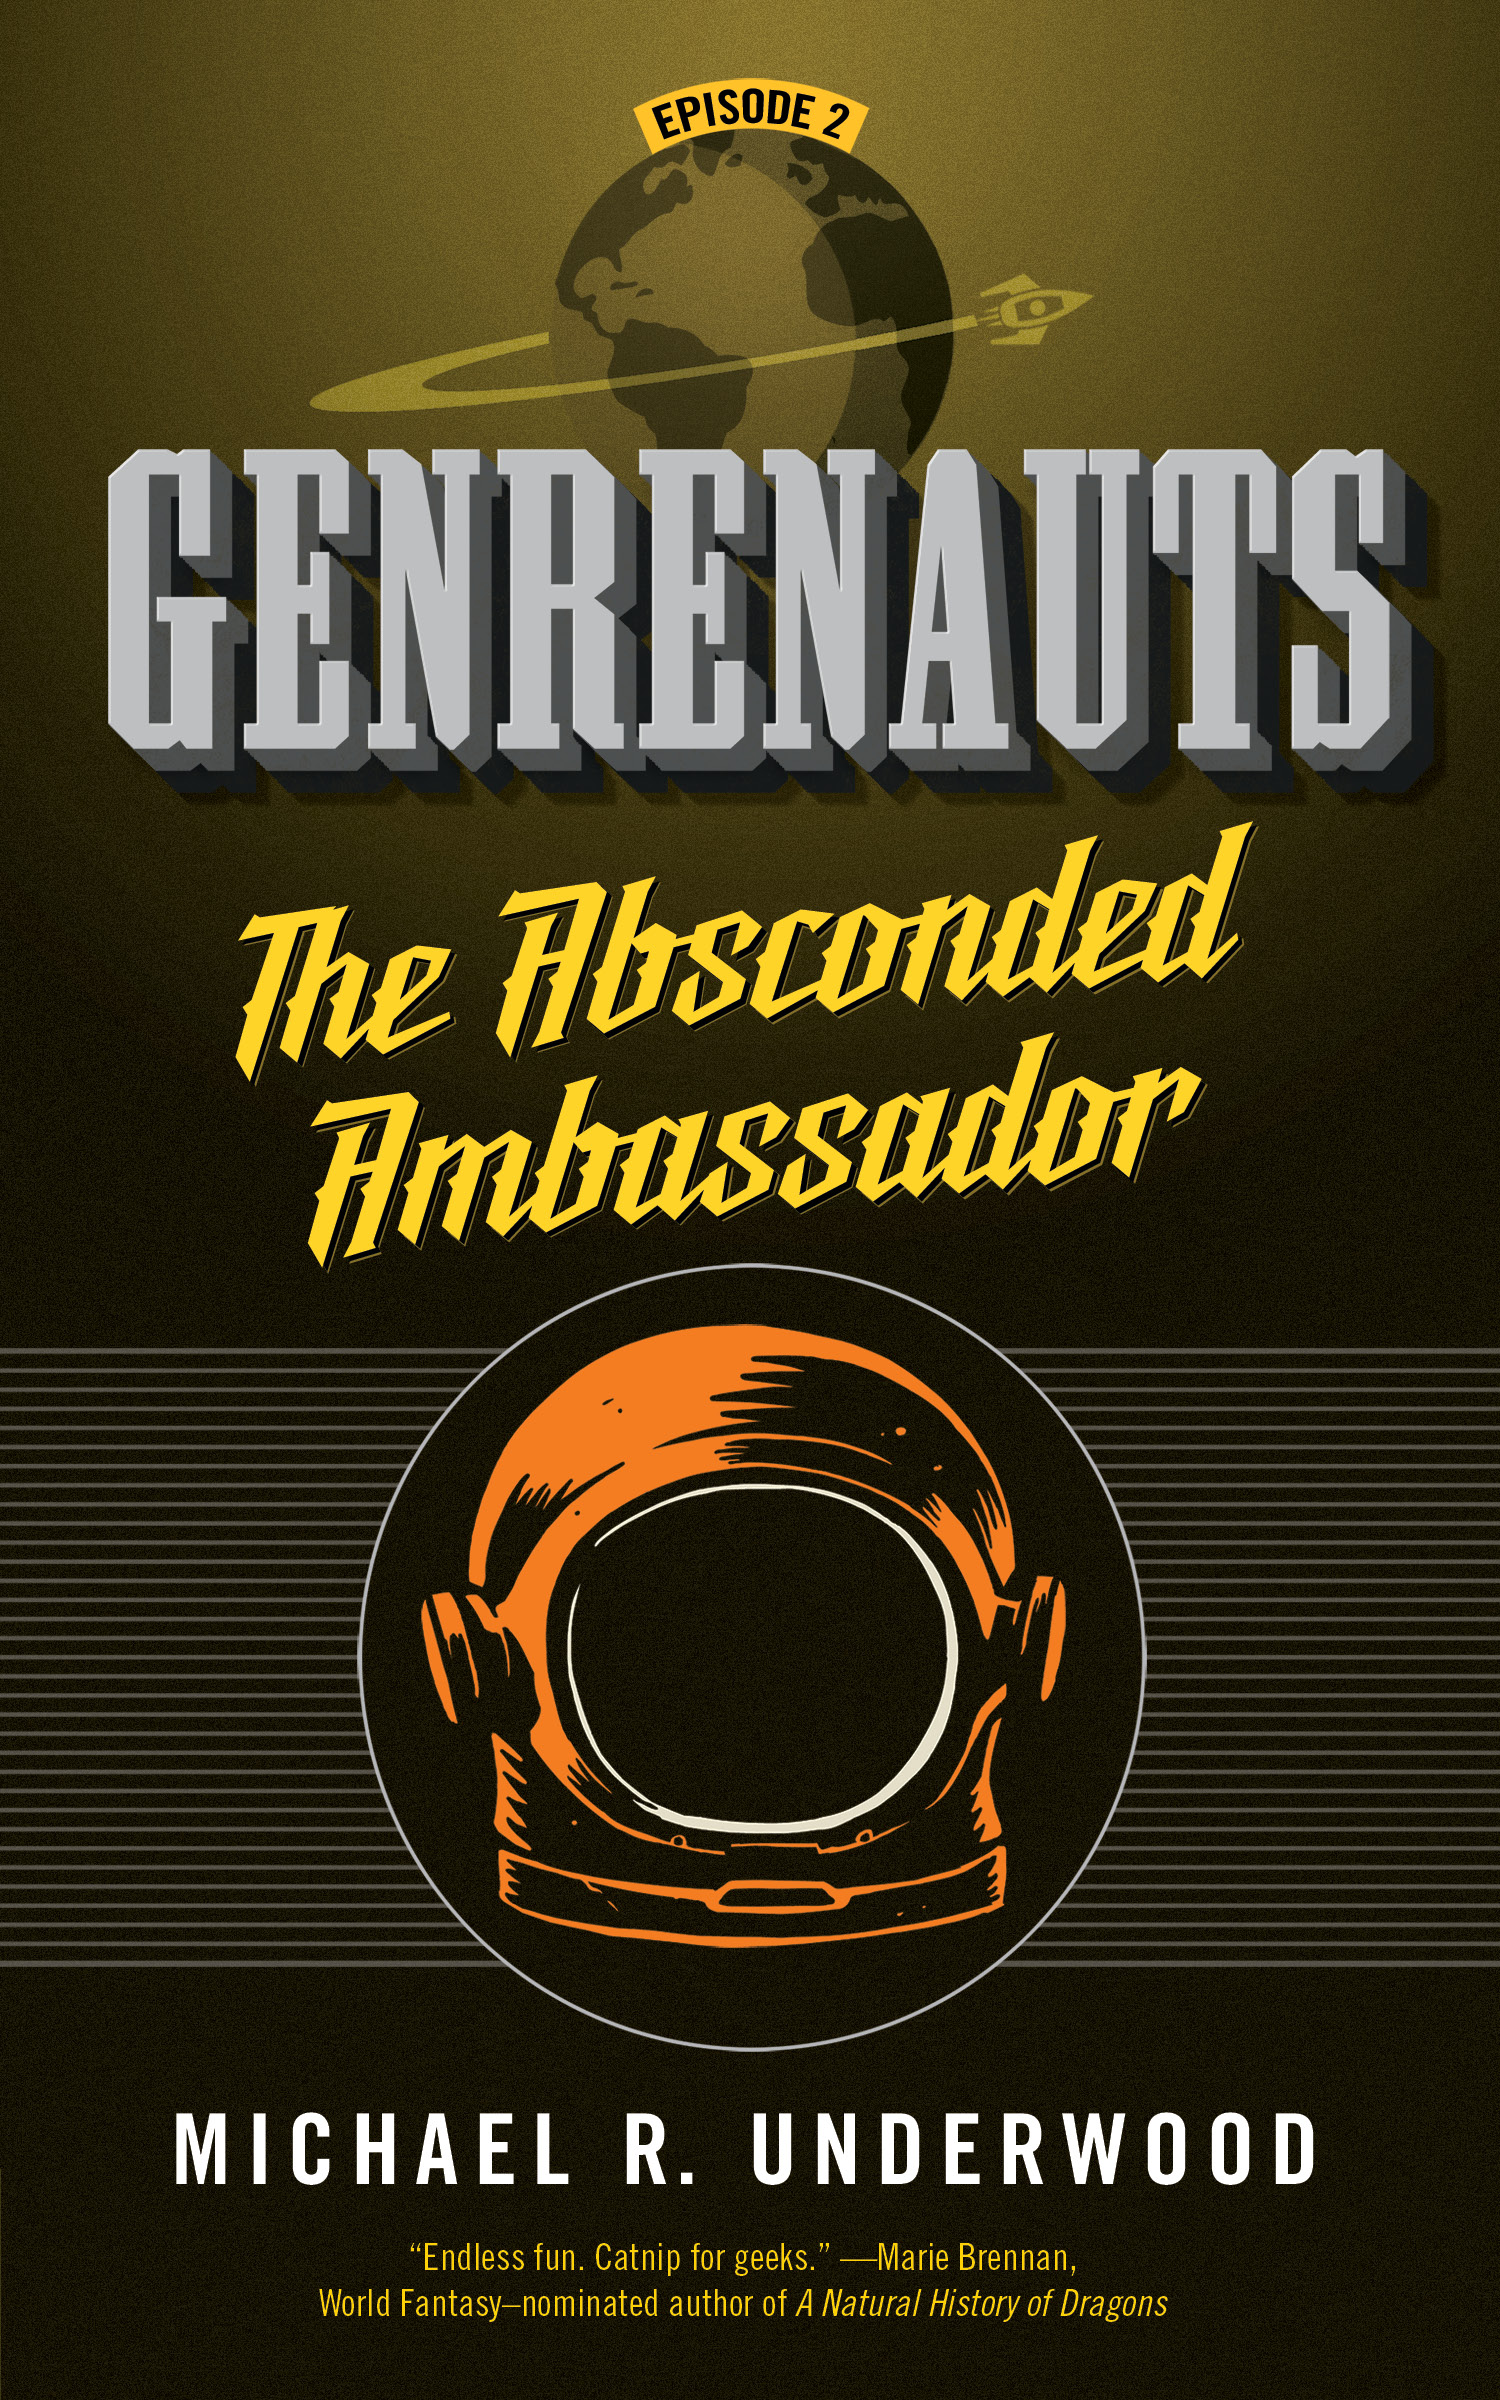 The Absconded Ambassador : Genrenauts Episode 2 by Michael R. Underwood